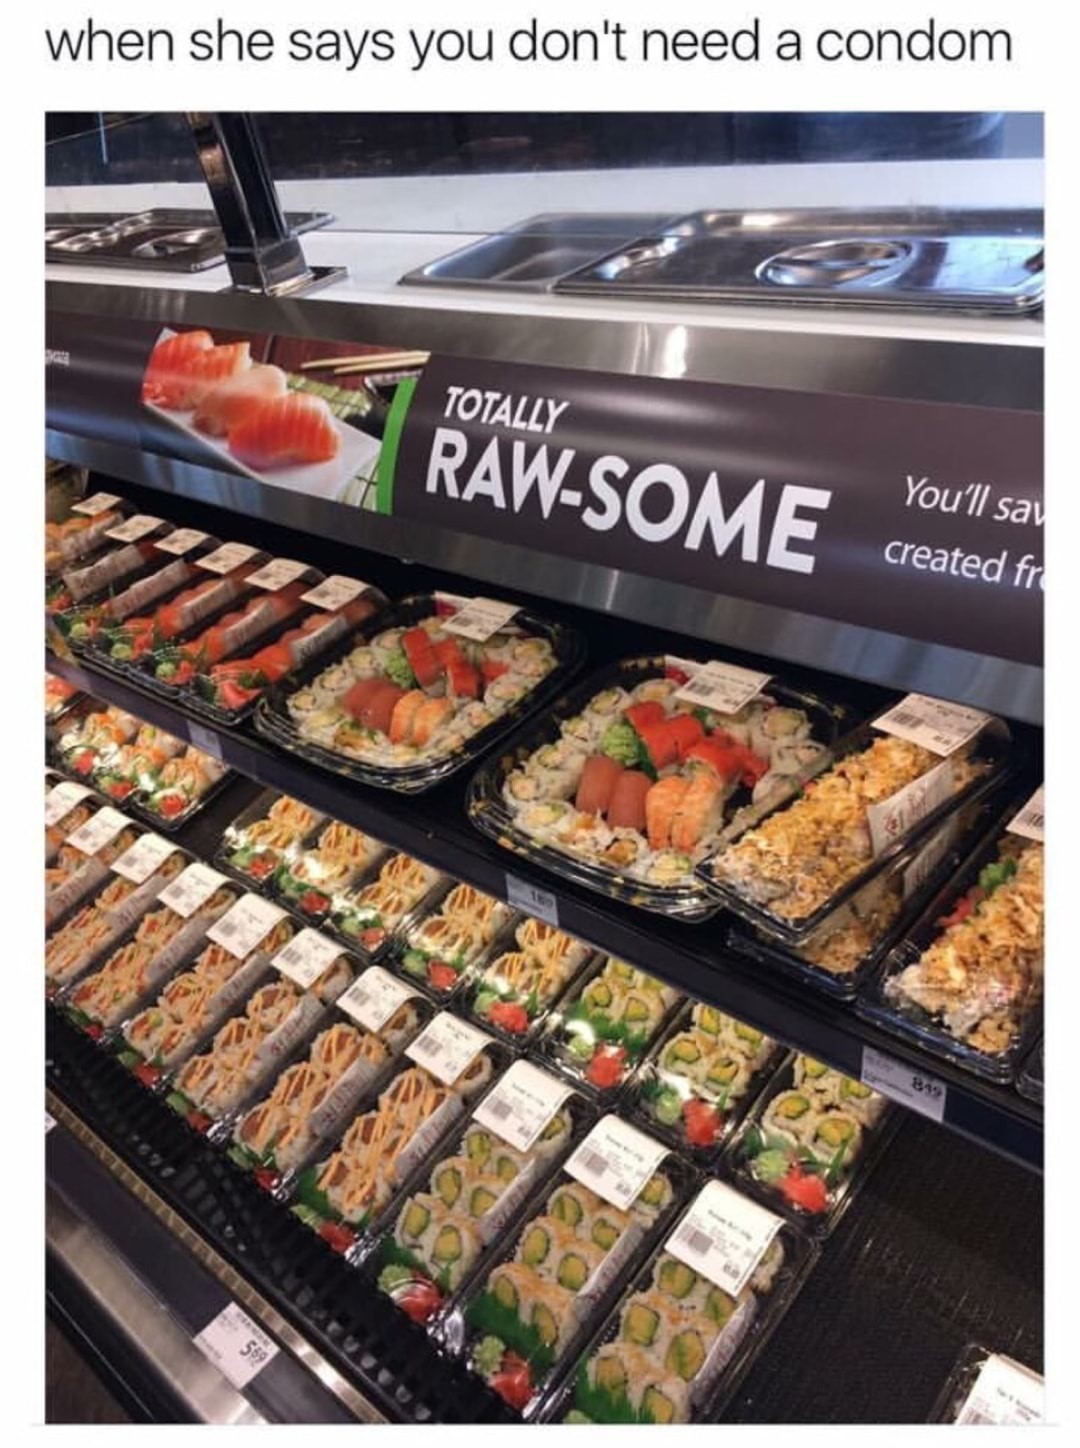 Raw-some as sushi stand name in supermarket and comment about other things that might fall in that category.